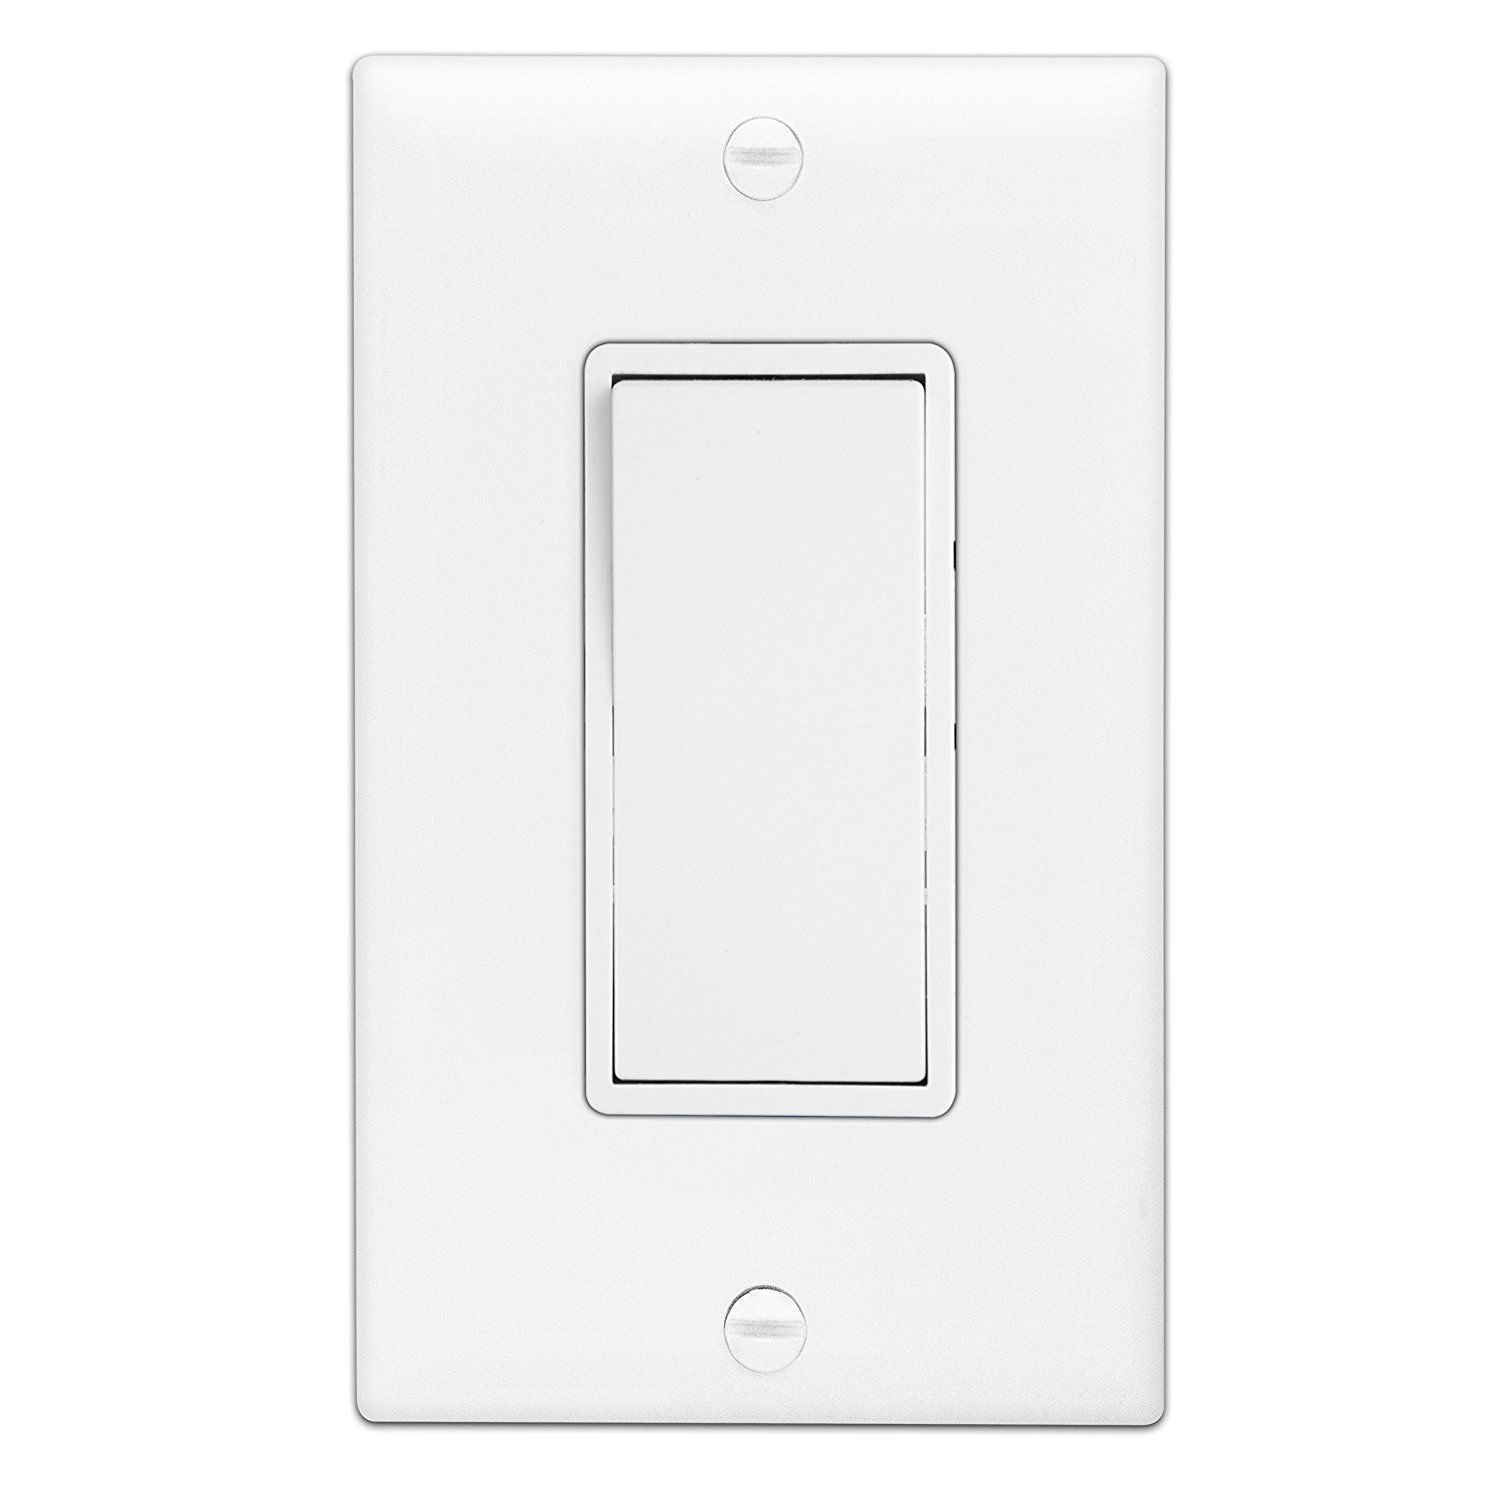 Enerlites 91150-WWP-10PCS Decorator 15A Light Switch with Wall Plate